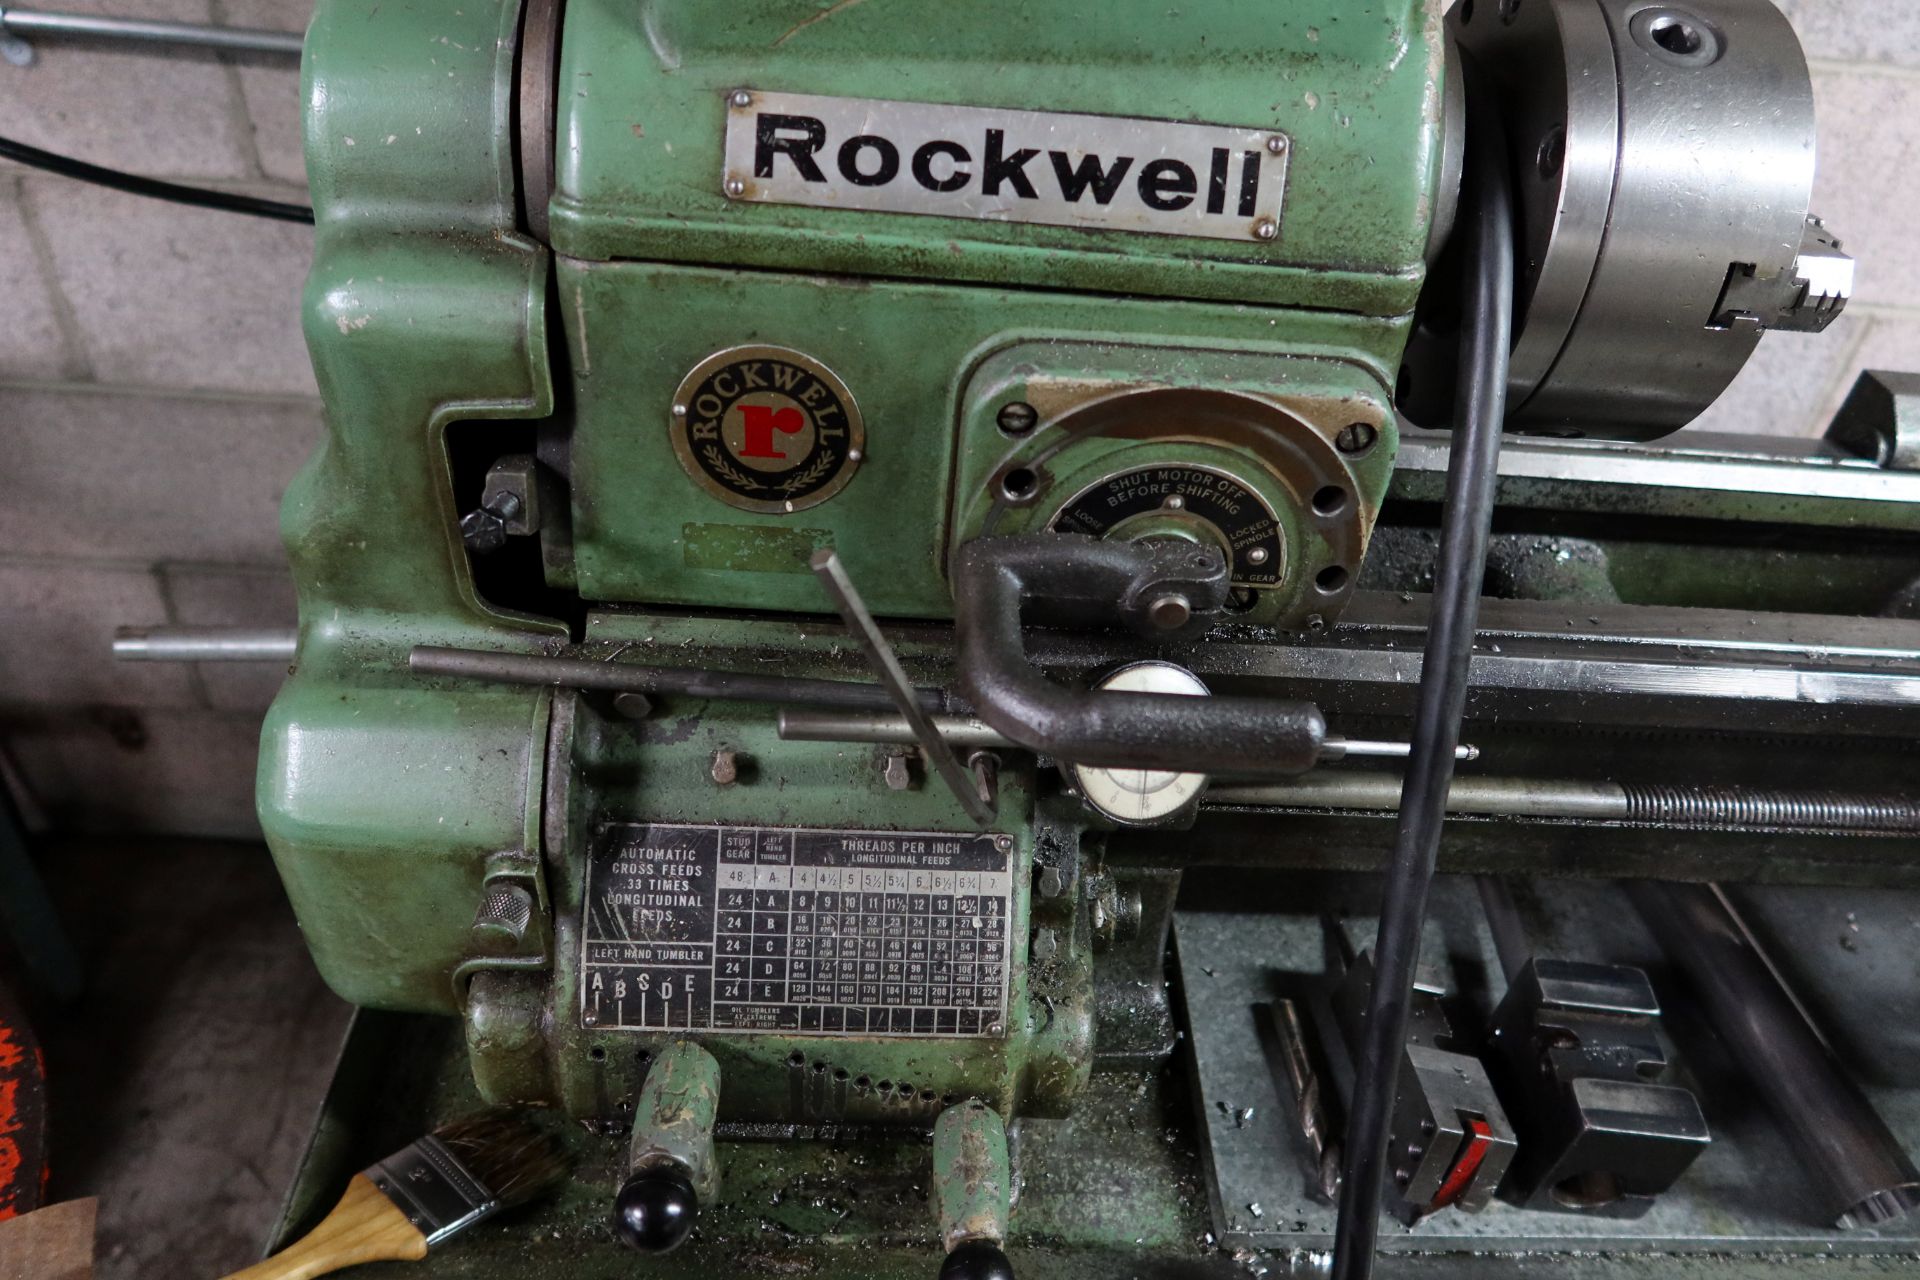 ROCKWELL 13 X 24 ENGINE LATHE W/3-JAW CHUCK, KDK TOOL POST & HOLDERS, DRILL CHUCK, ETC. - Image 2 of 8